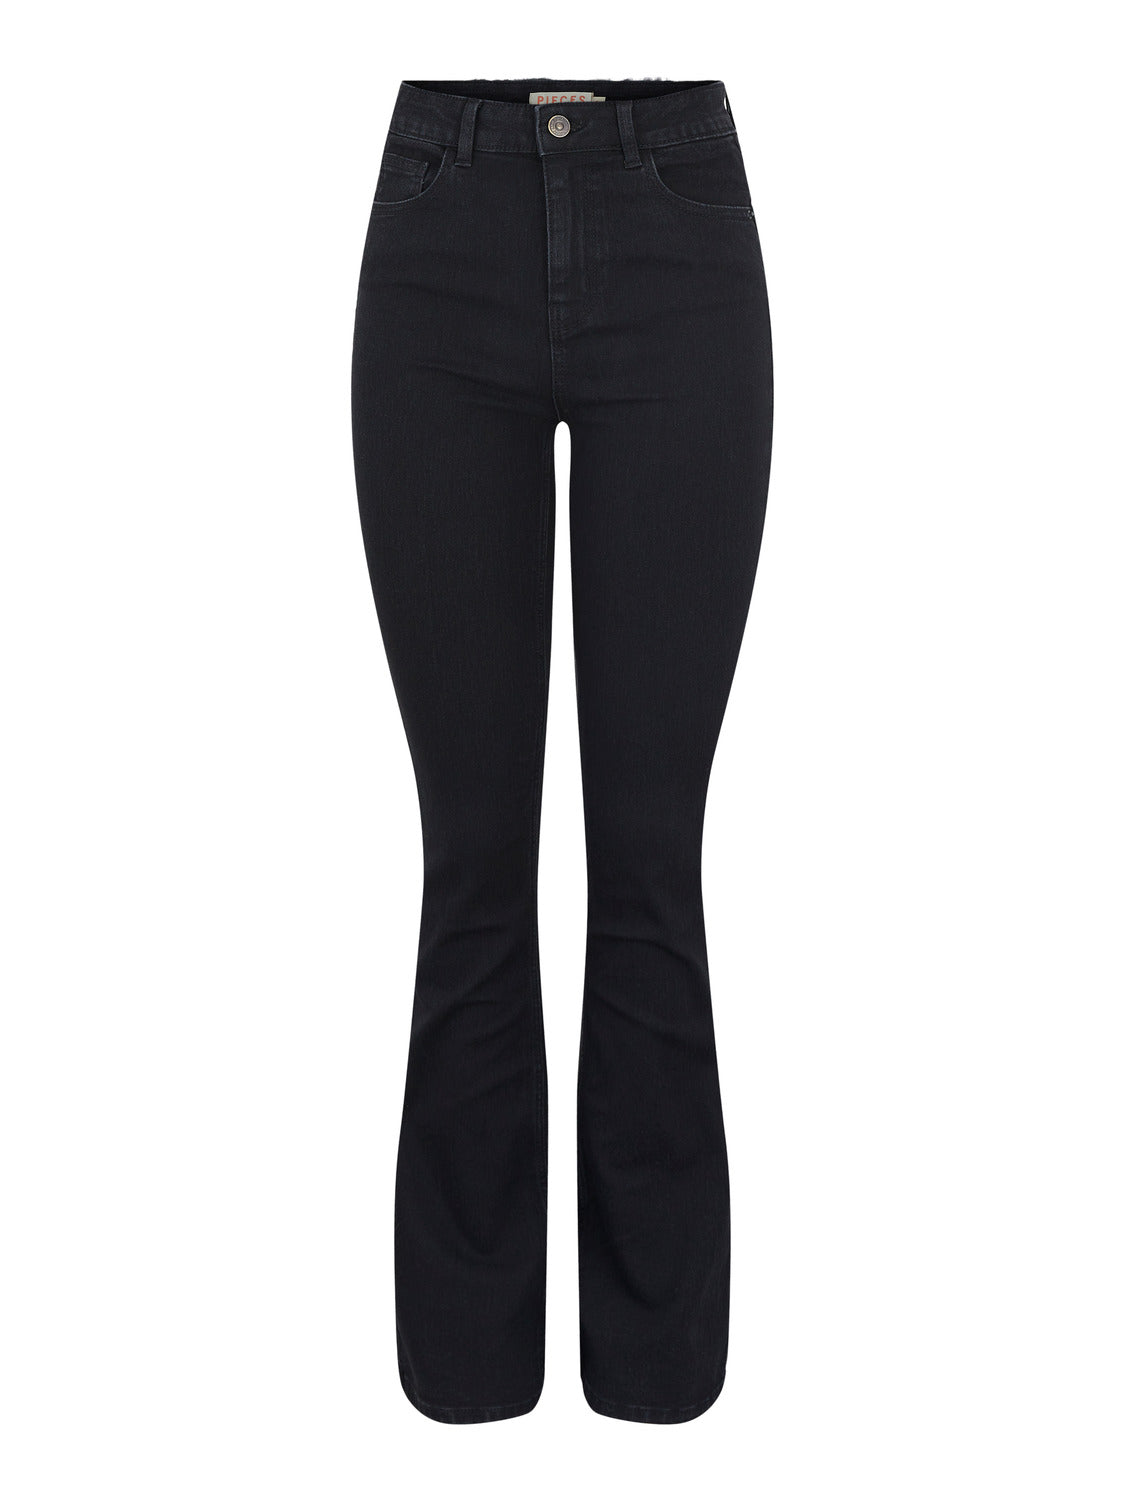 PCPEGGY Jeans - black